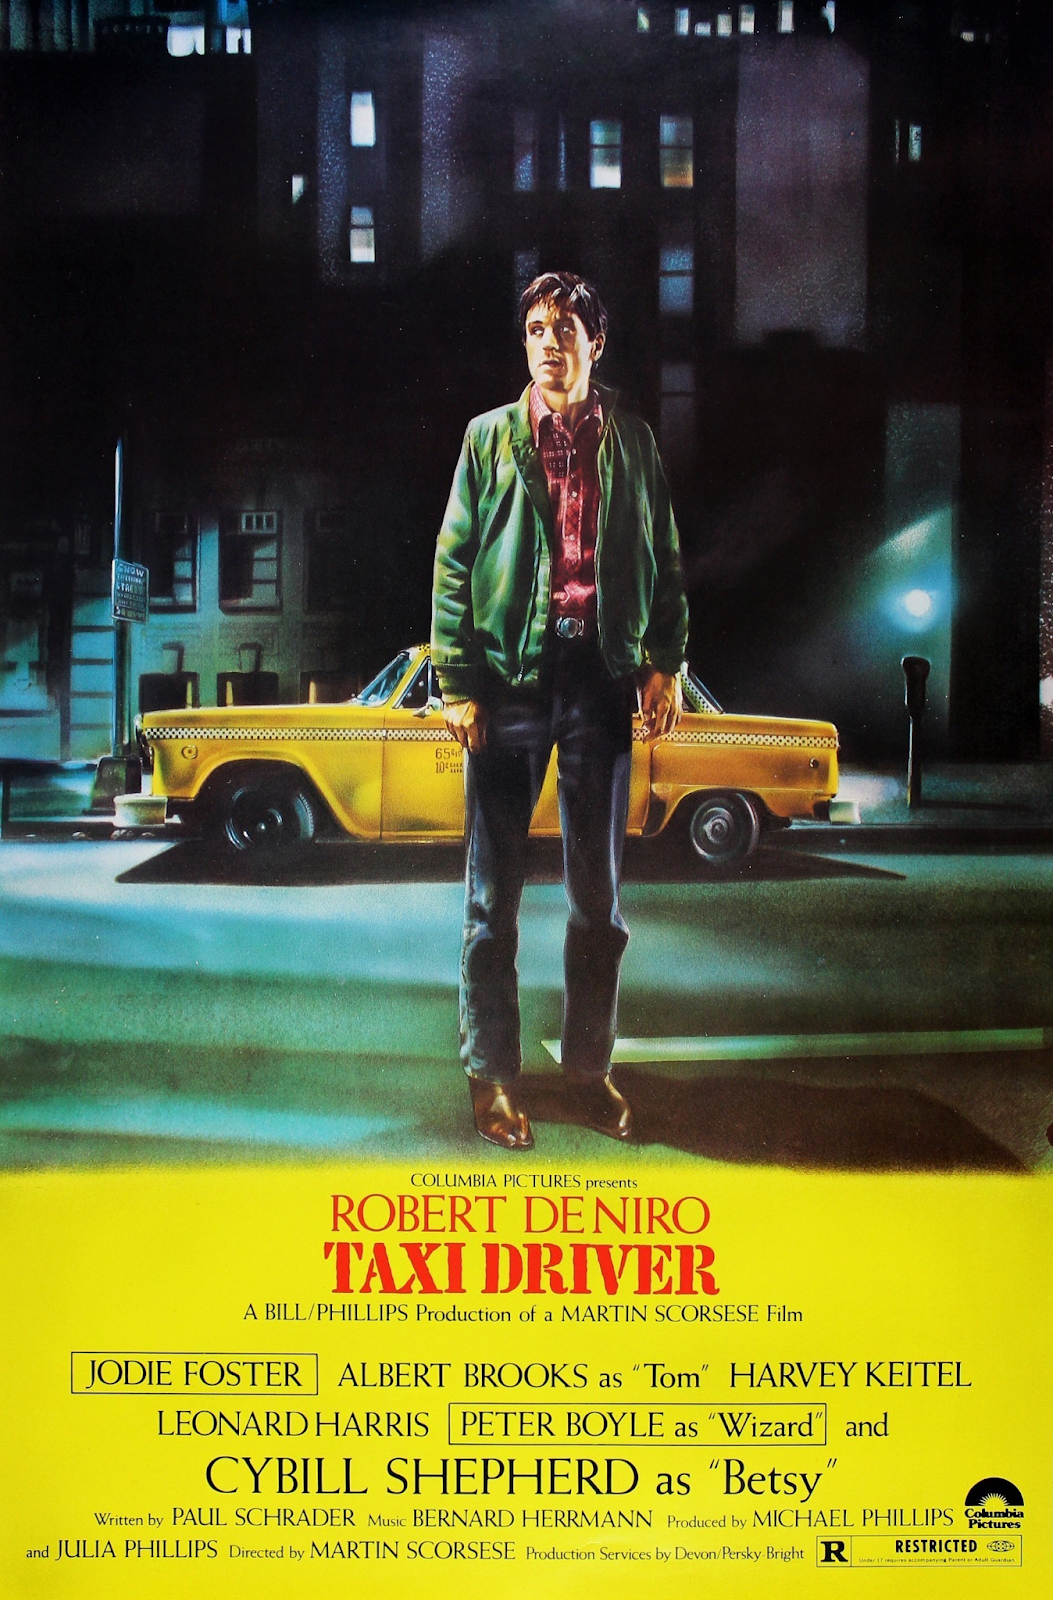 Taxi Driver (1976) — A Haunting Exploration of Isolation and Descent into  Darkness, by Shreader